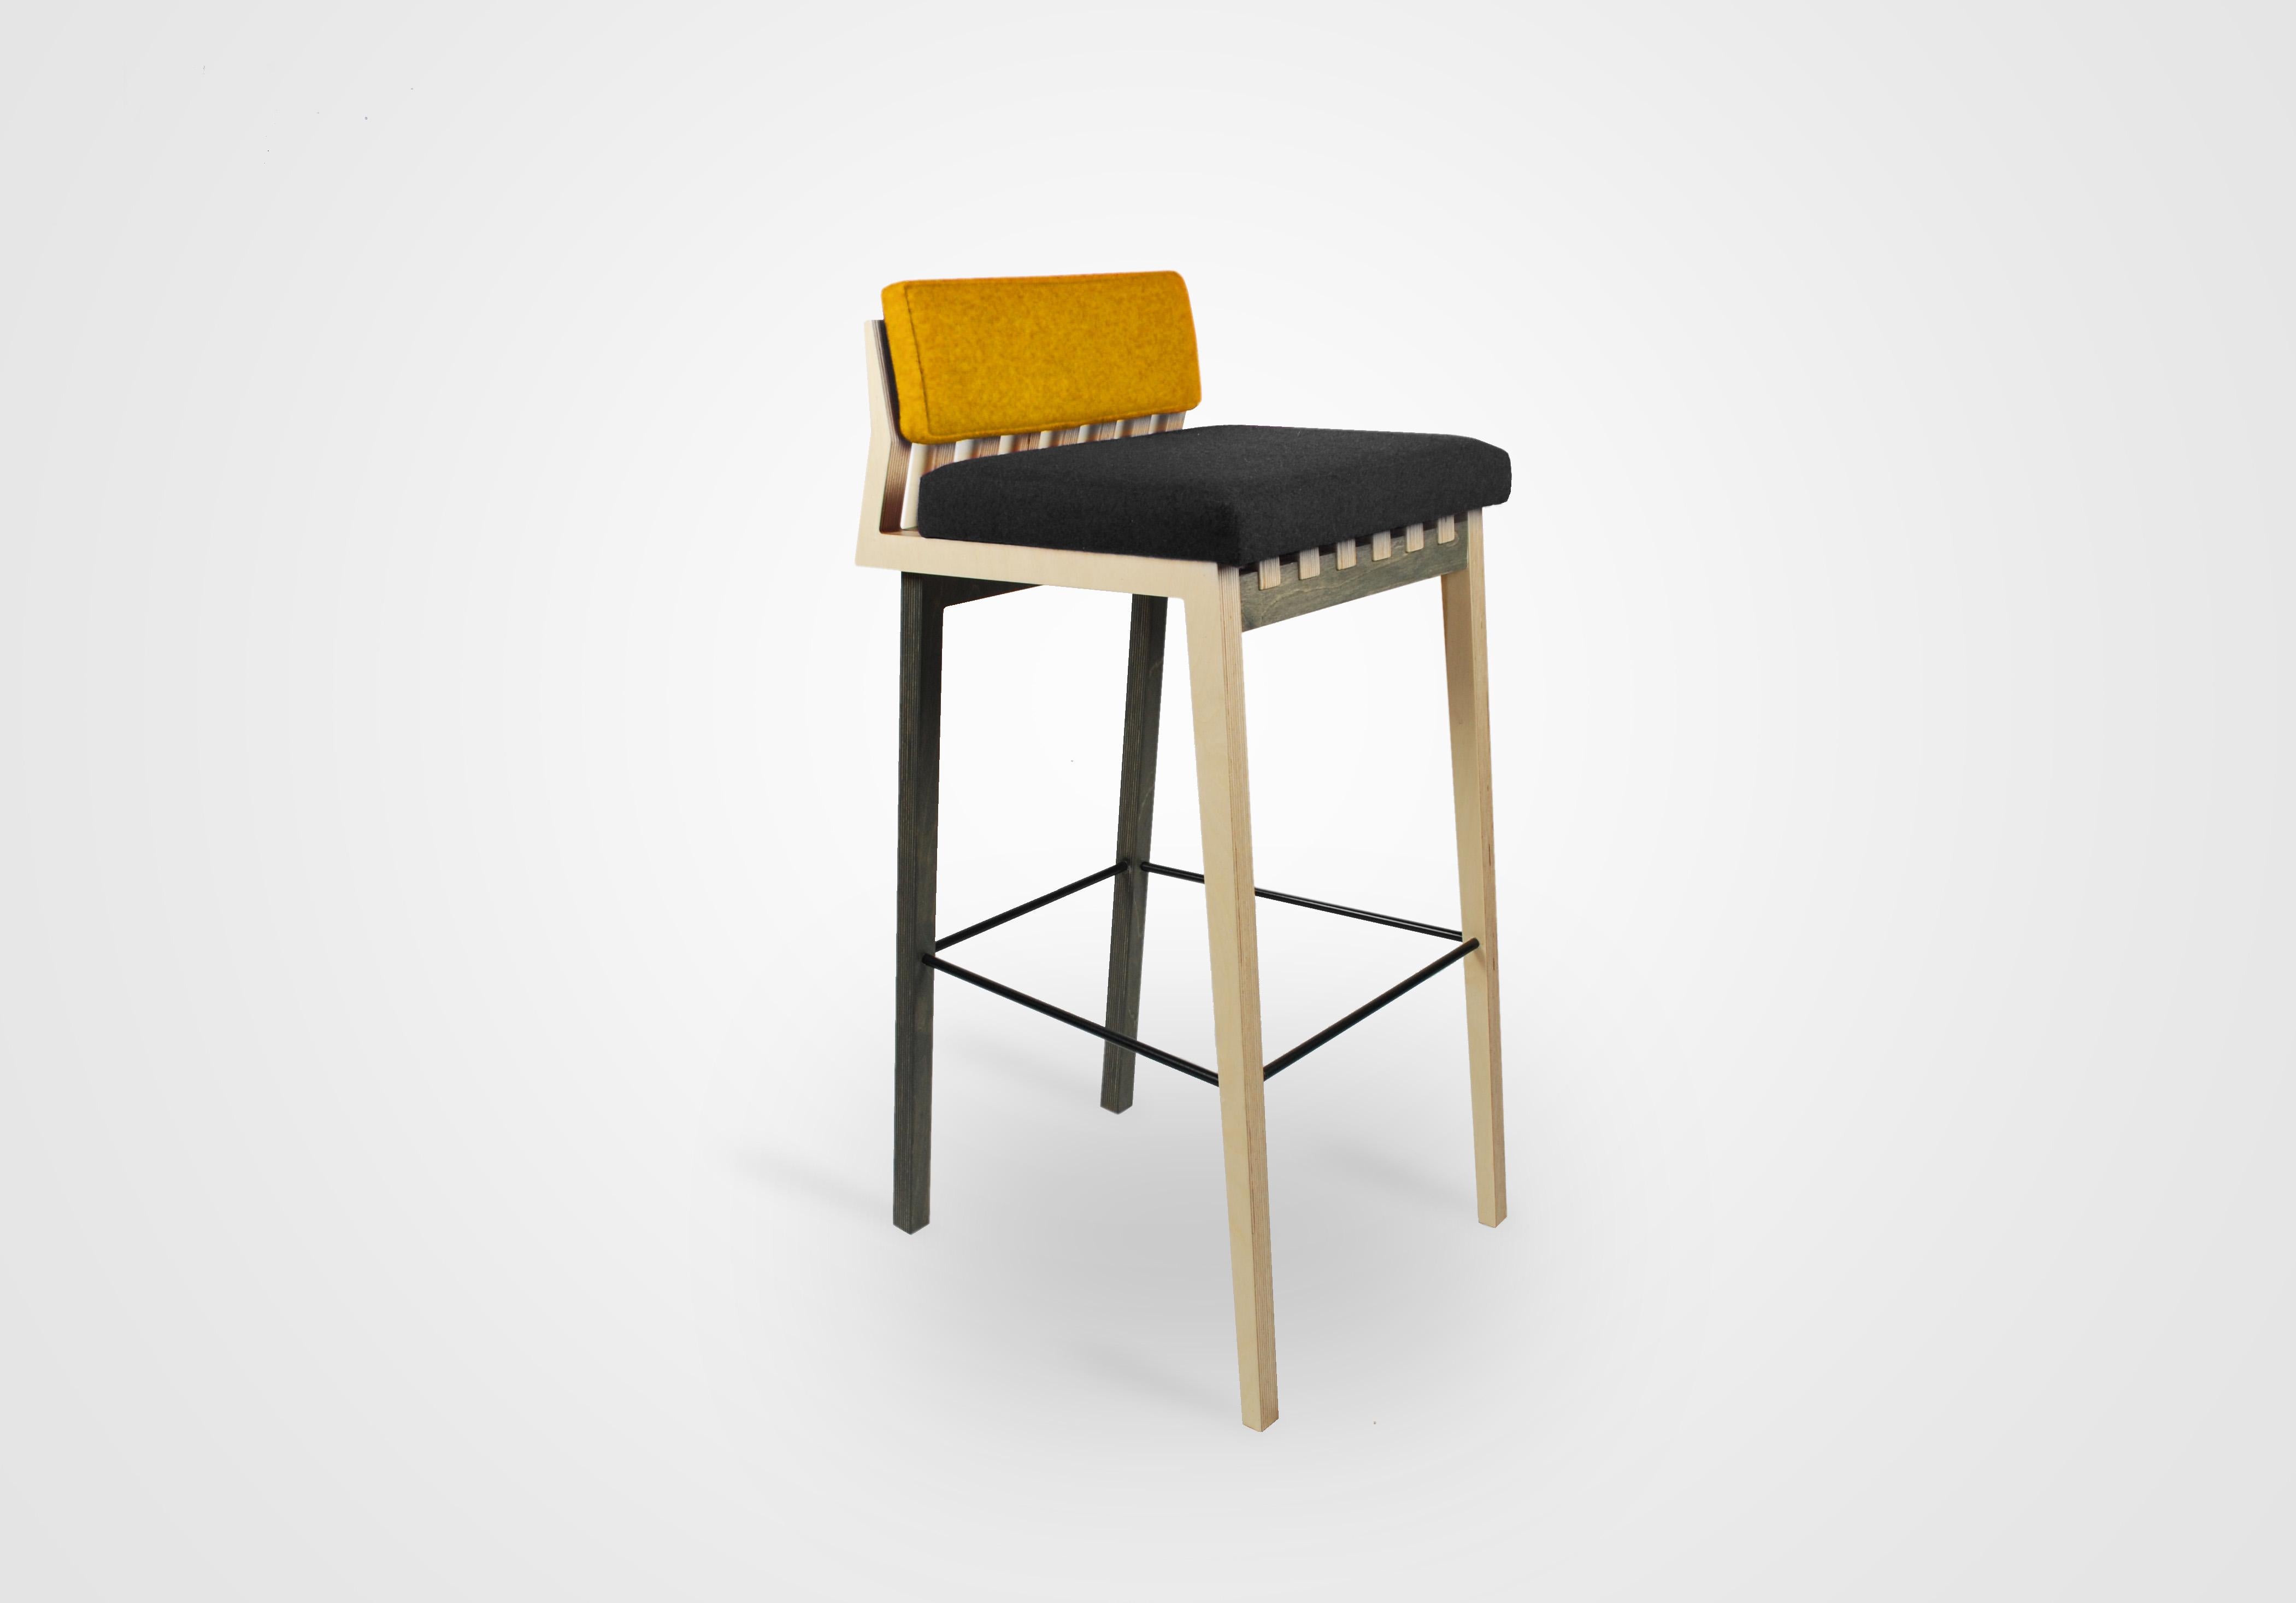 This  bar chair is following the design of our dinning chairs. Its minimalistic crisp lines and functional form are inspired by the new Nordic design.
This chair is made of sustainable birch plywood using CNC cut with innovating waste efficiency